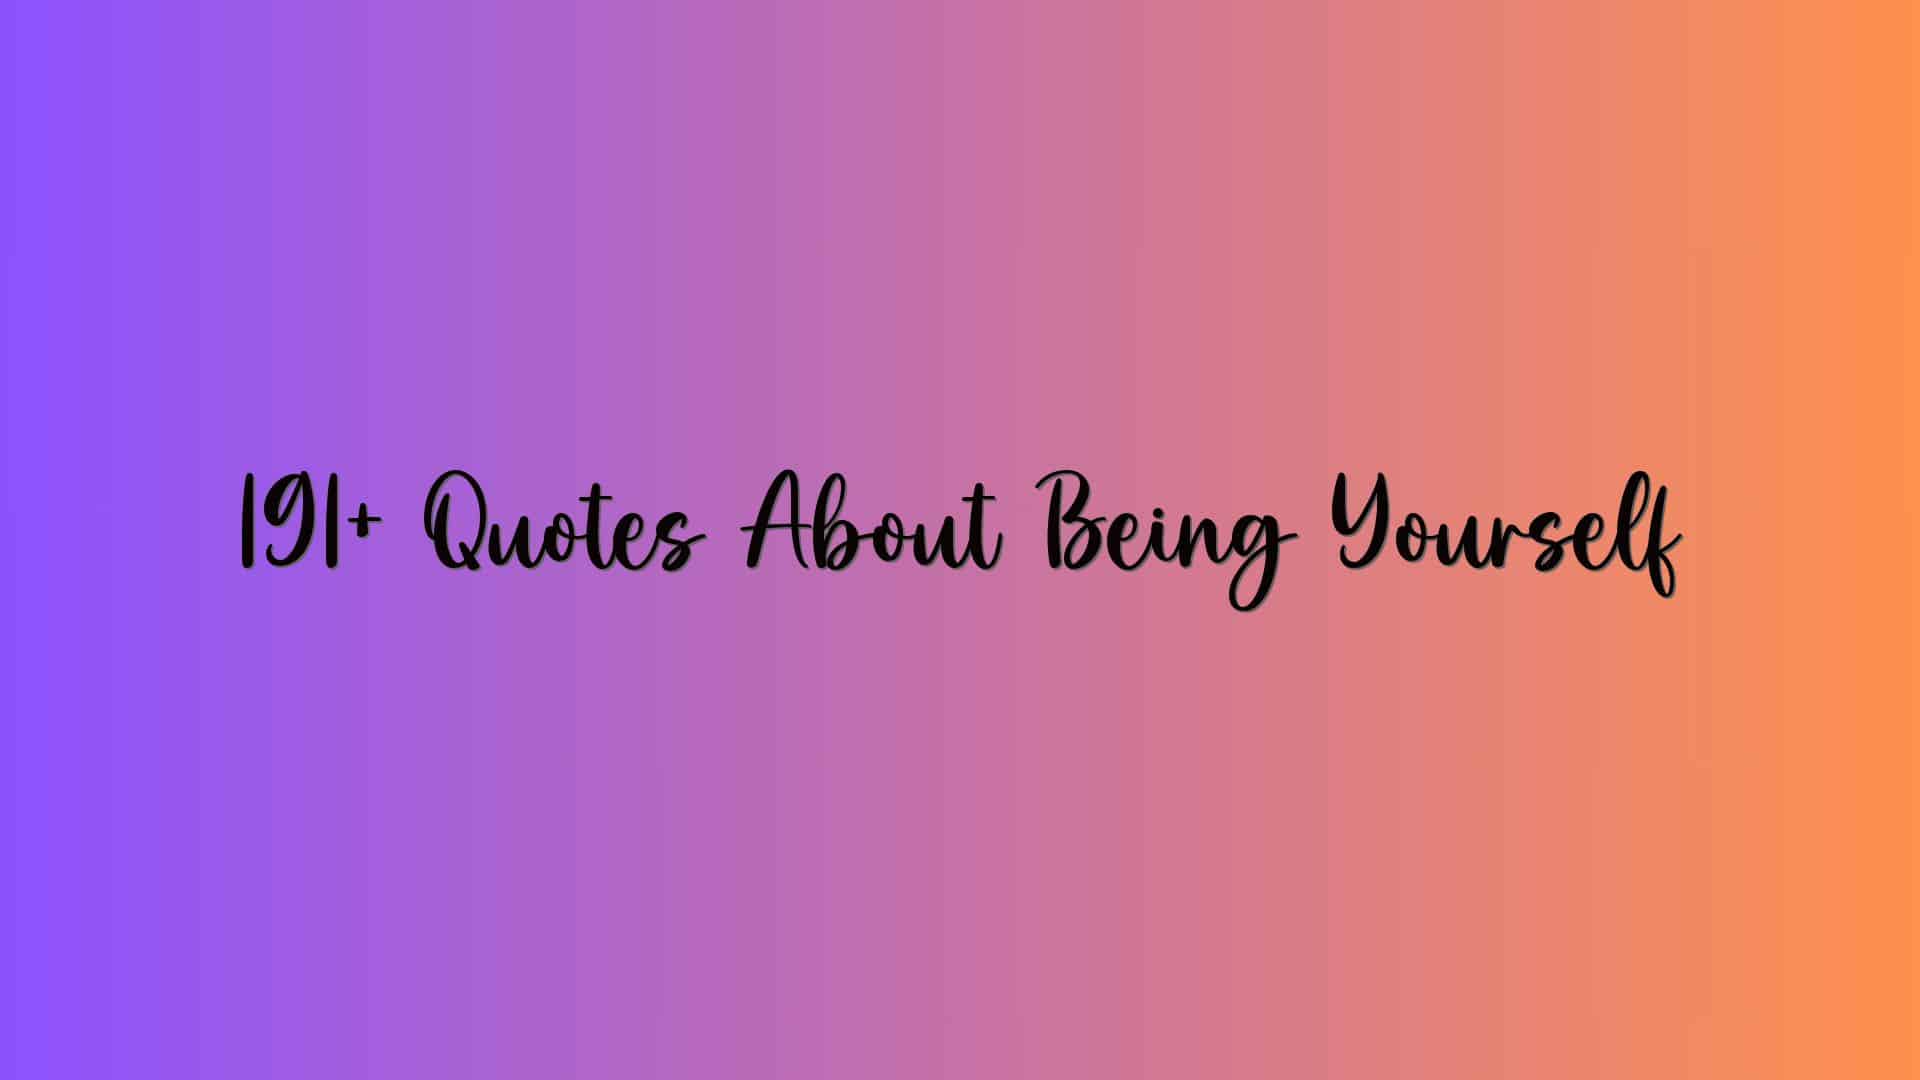 191+ Quotes About Being Yourself